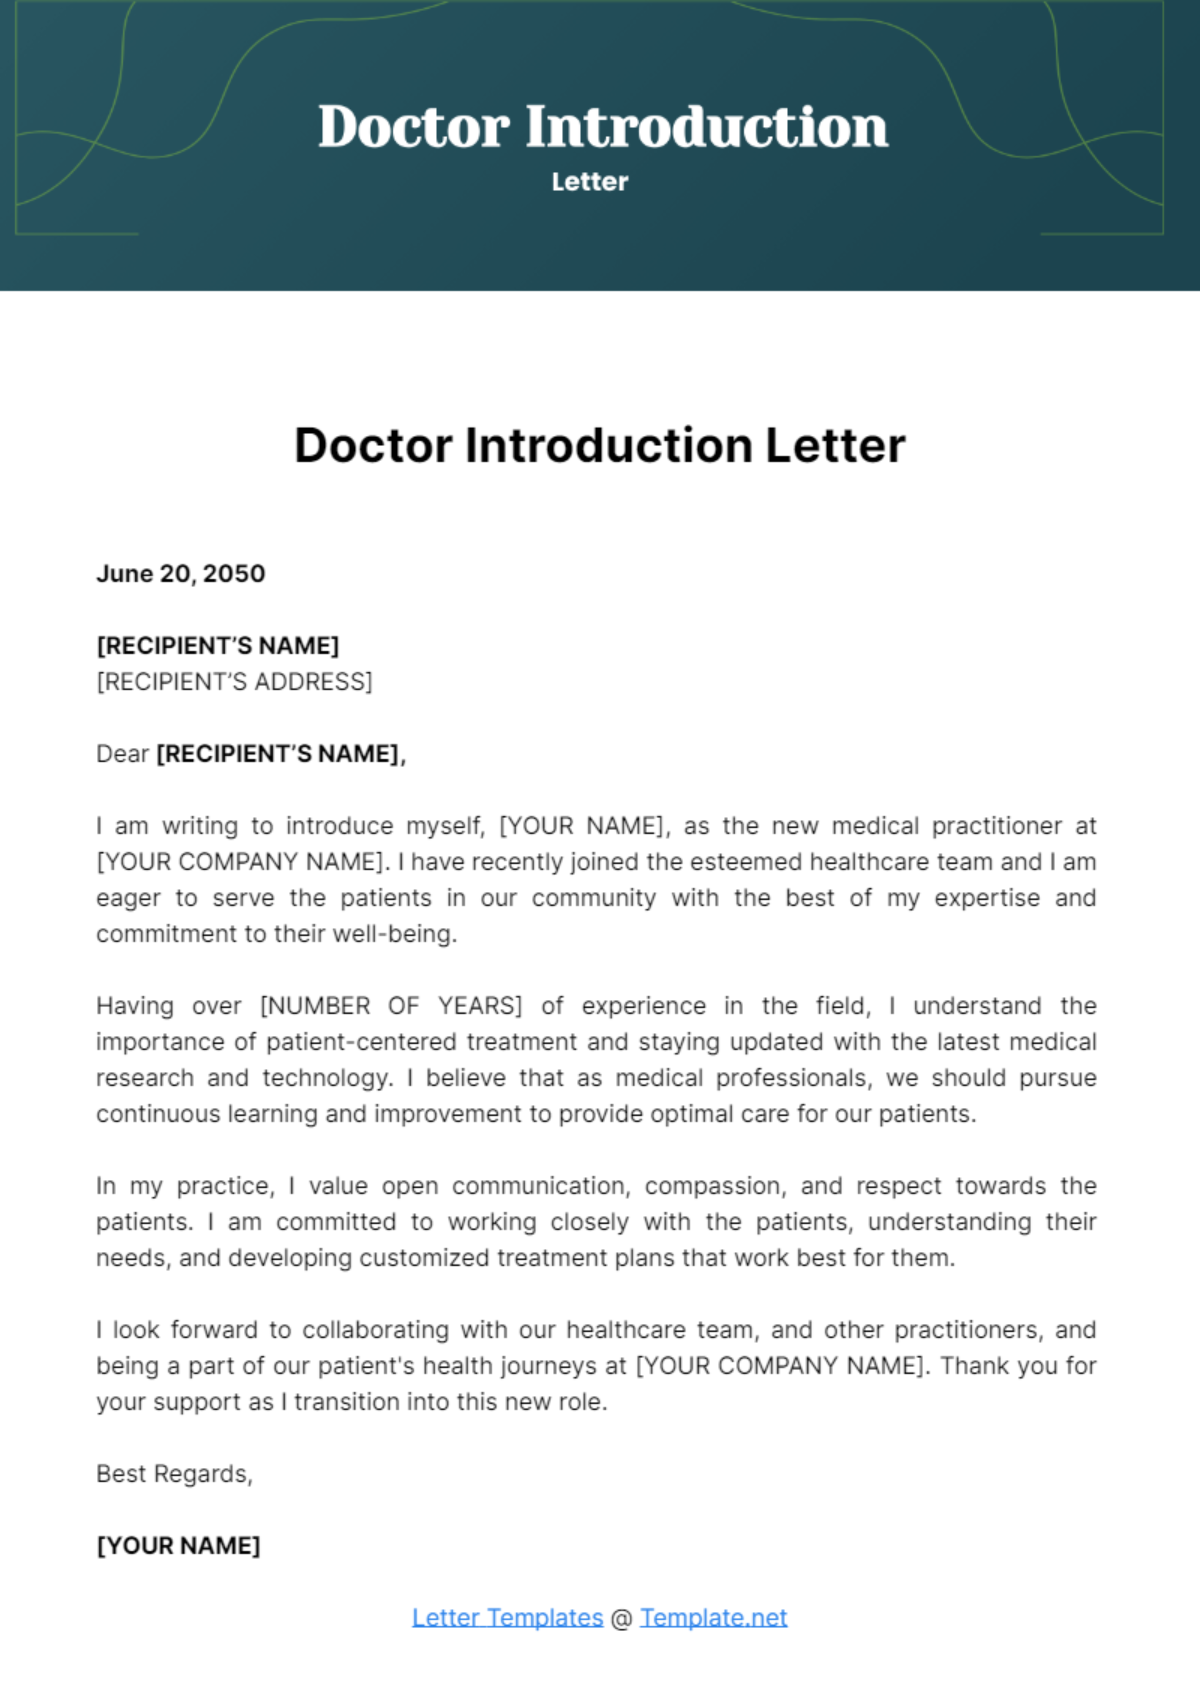 Free Doctor Introduction Letter Template